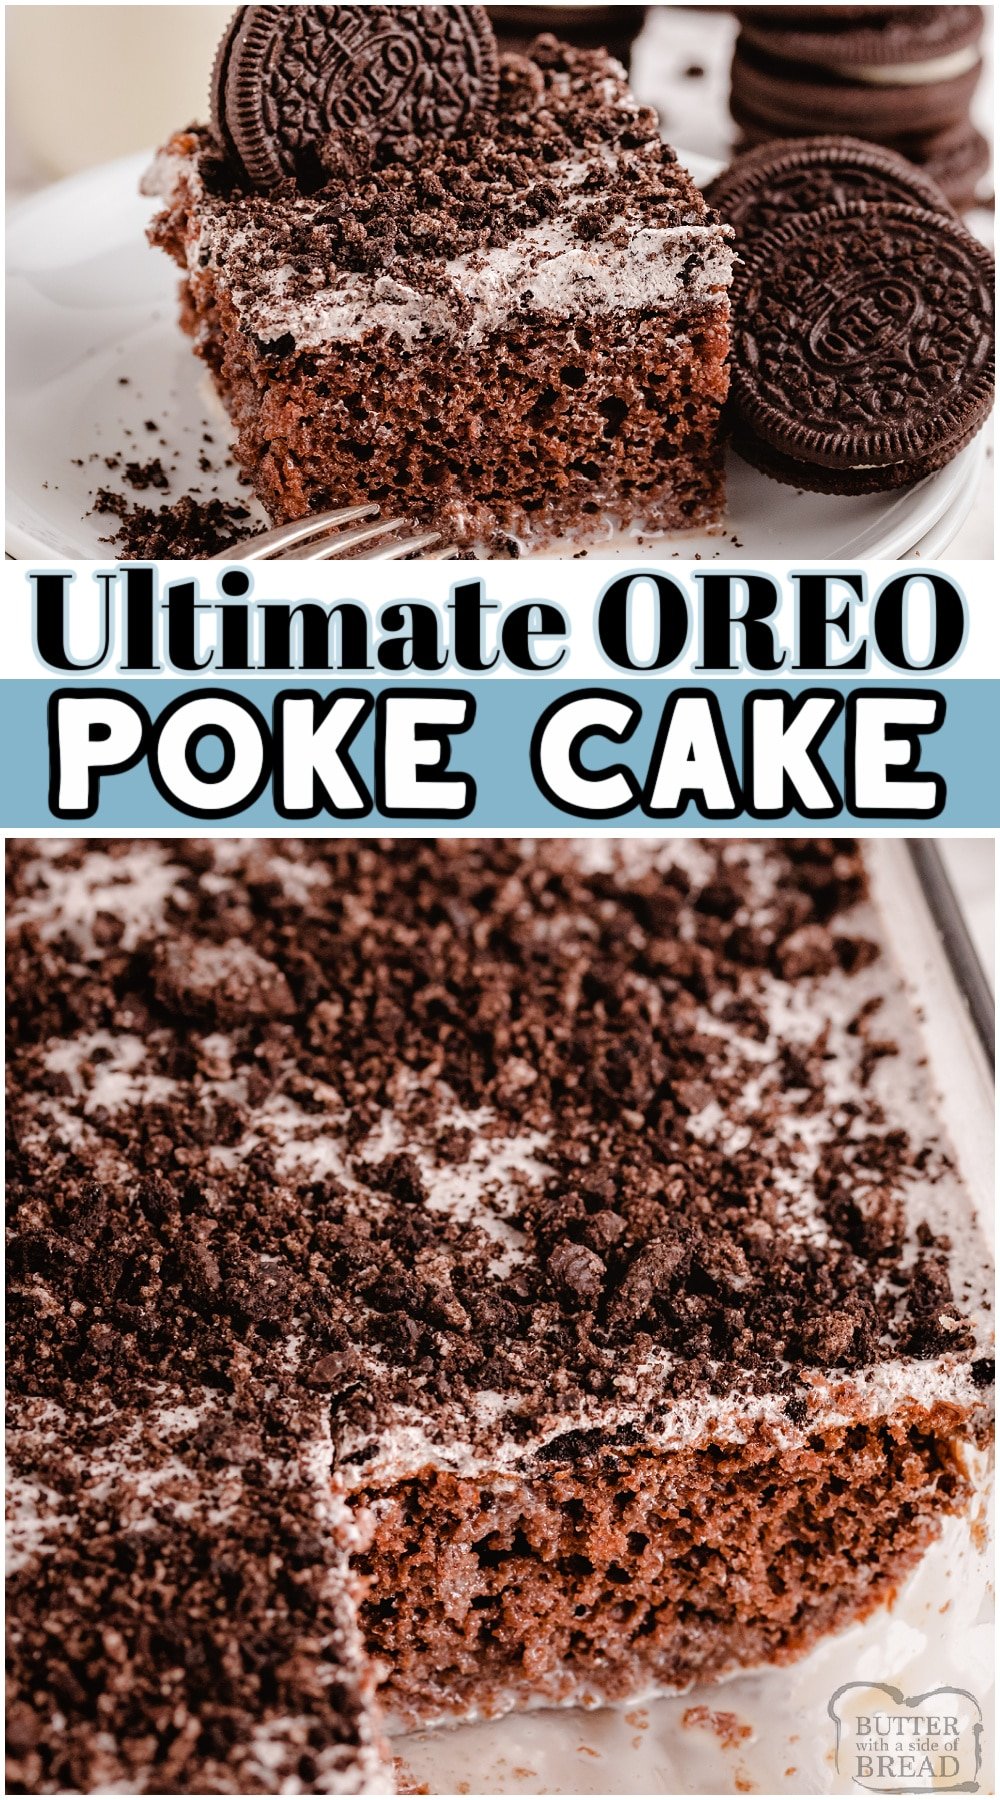 Oreo Poke Cake made with a chocolate cake mix, drizzled with condensed milk and a whipped cookies & cream topping. Everyone goes crazy for this tasty poke cake.